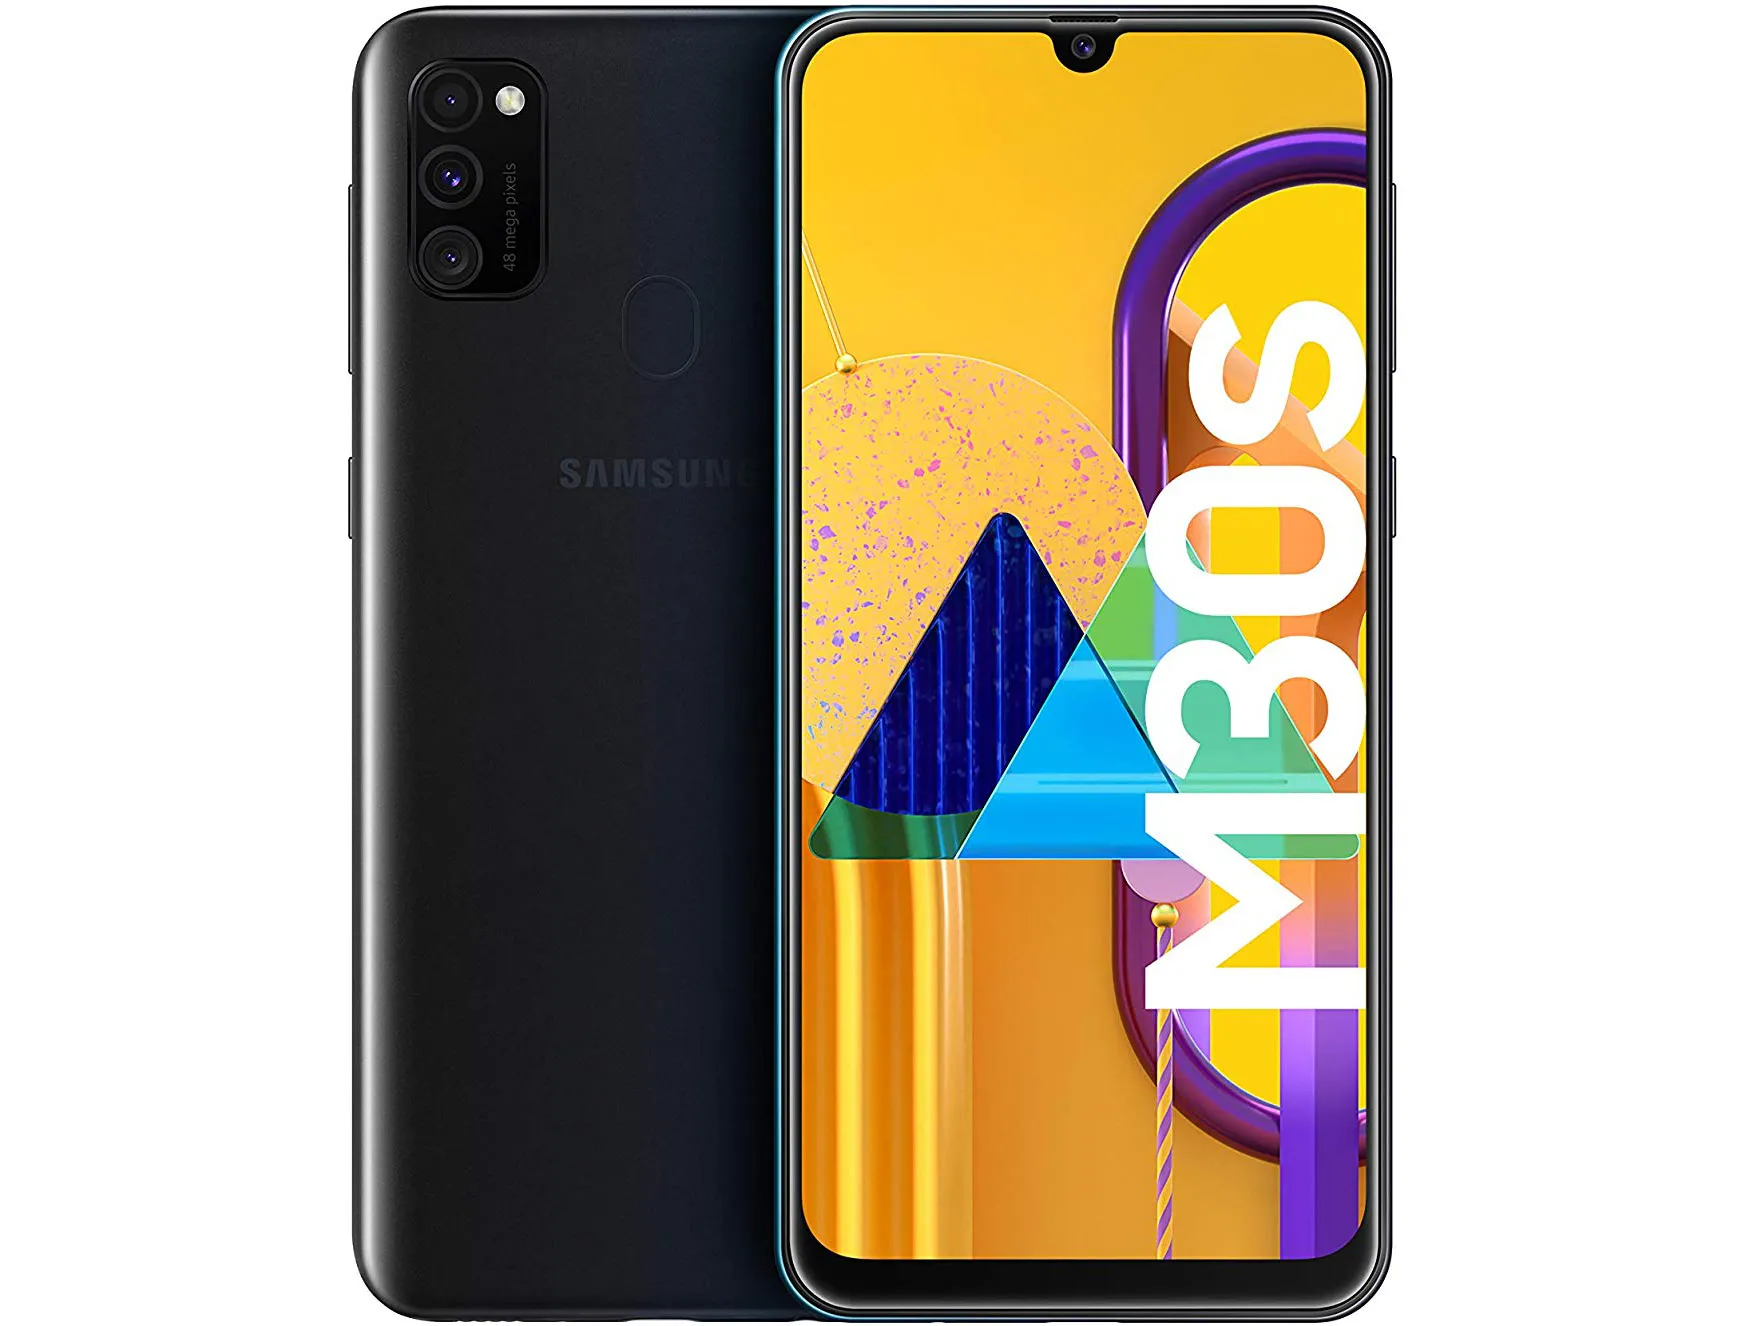 Fix Samsung Galaxy M30s that gets stuck on the logo during boot up